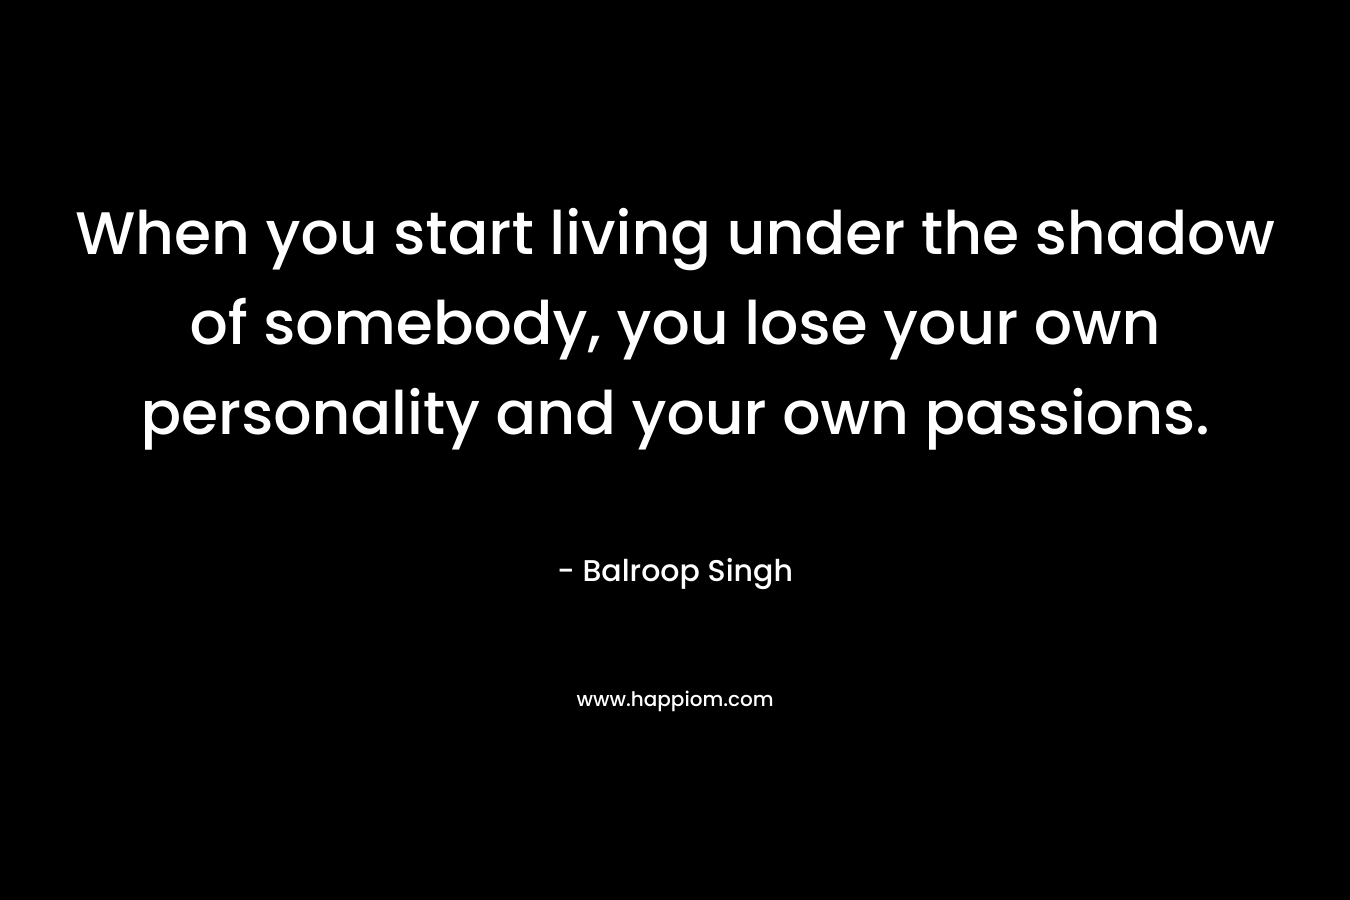 When you start living under the shadow of somebody, you lose your own personality and your own passions.